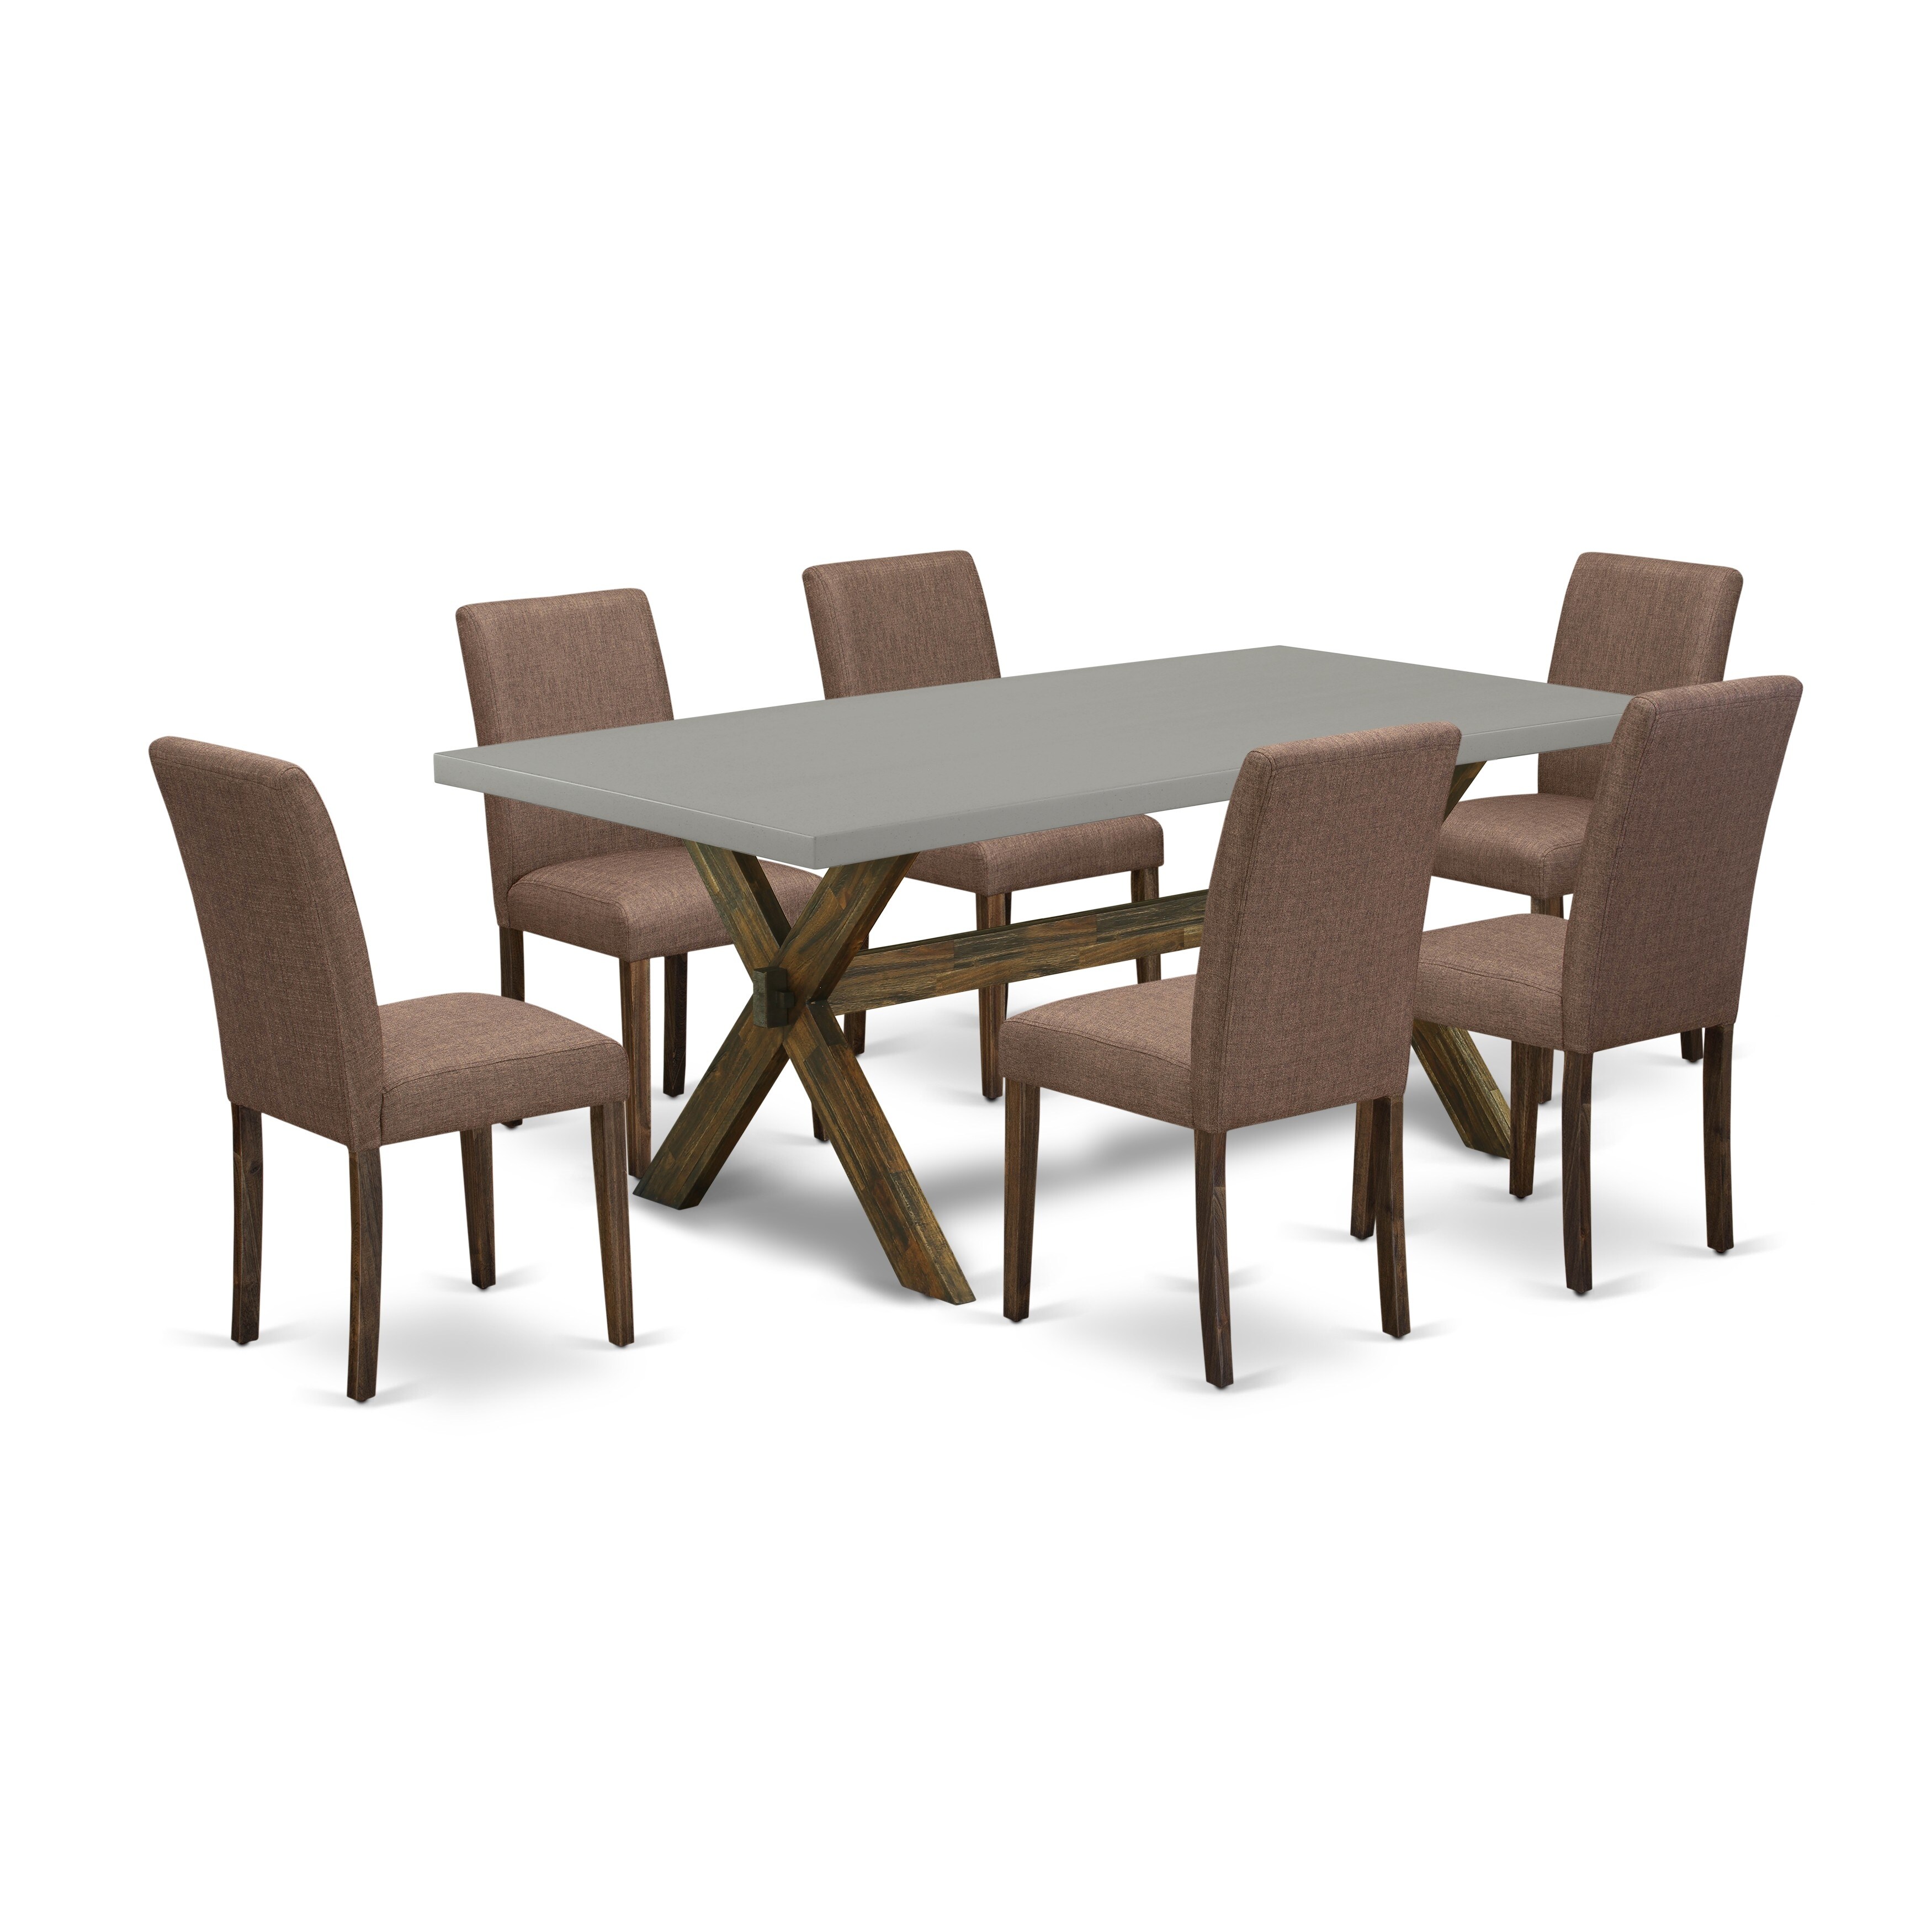 East West Furniture Kitchen Table & Chairs Set - X797AB747-5